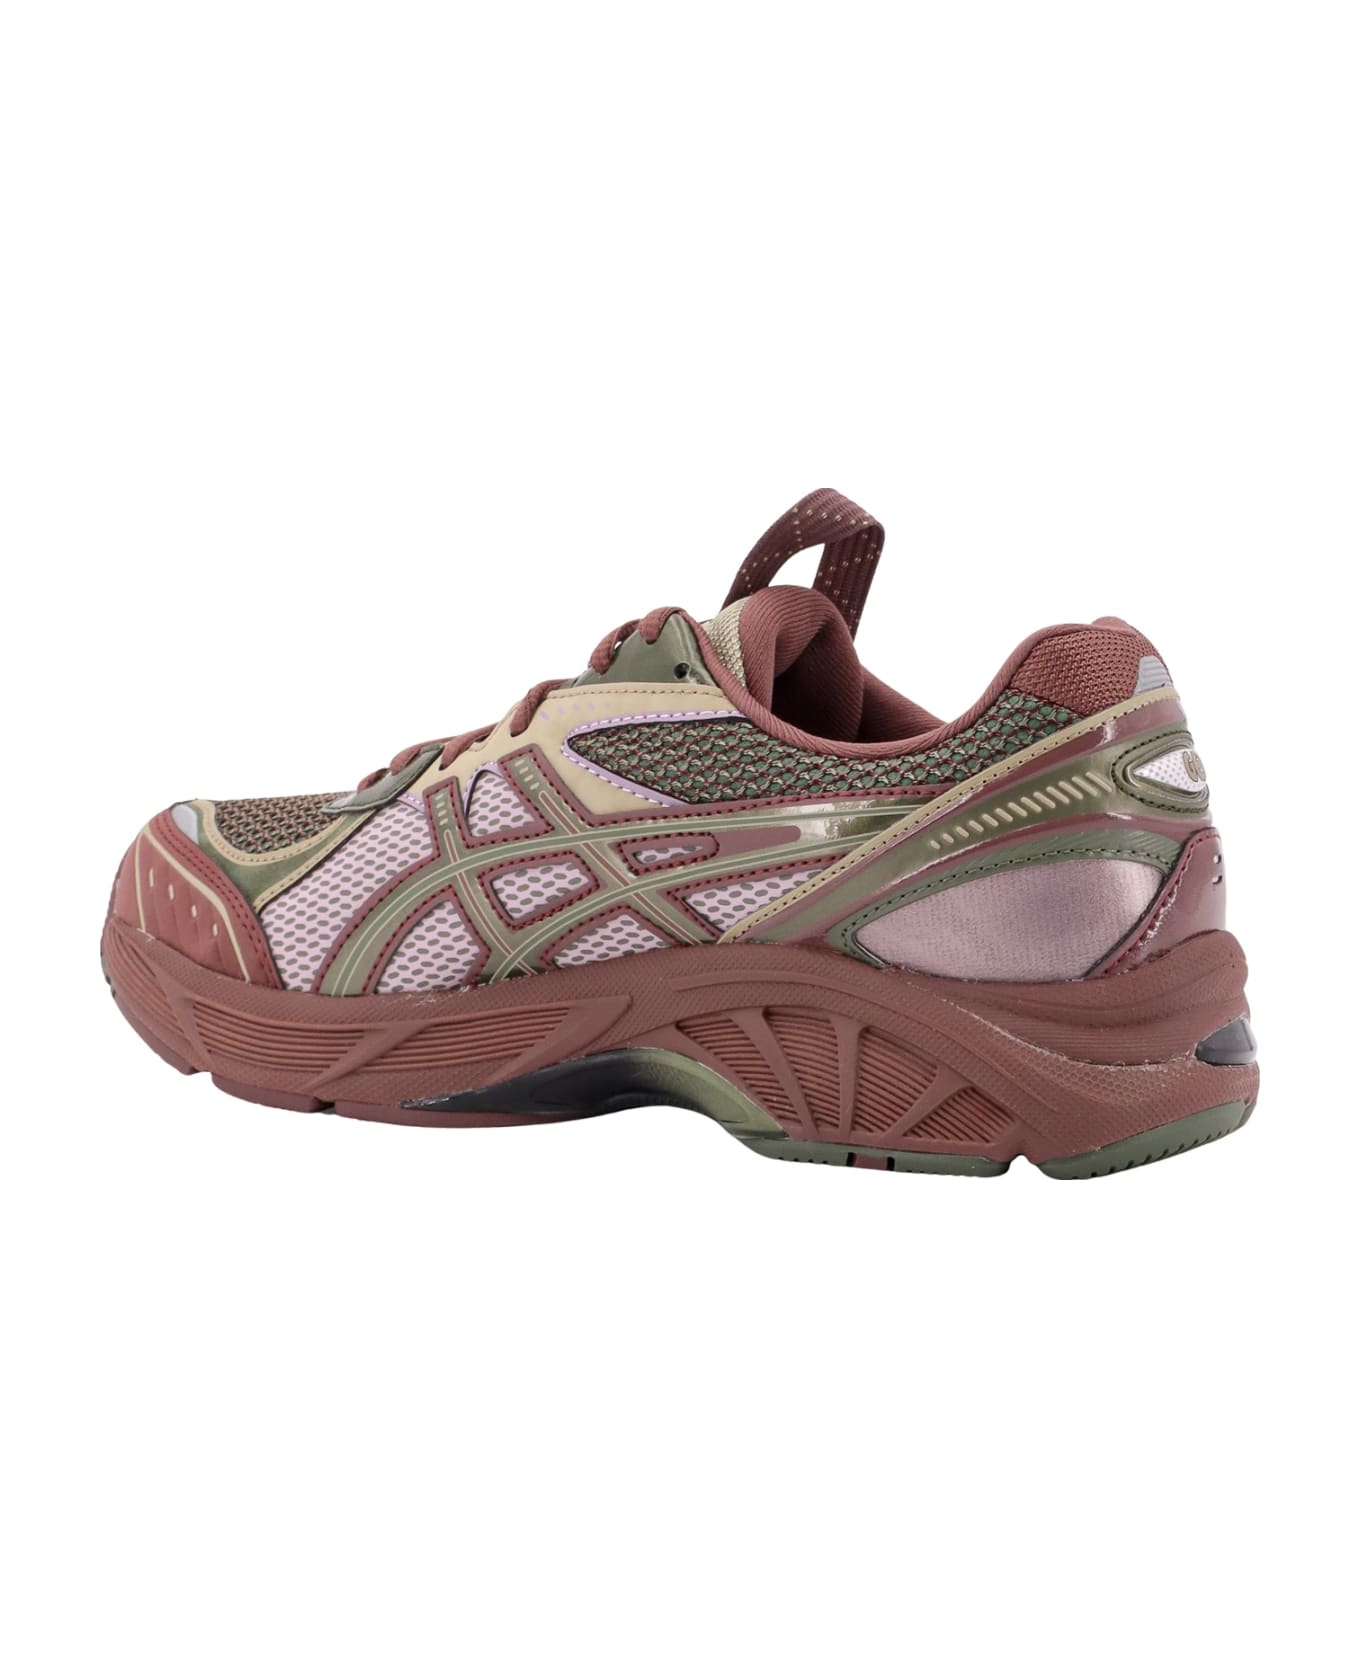 Asics Ub6-s Gt-2160 Sneakers - Pink スニーカー